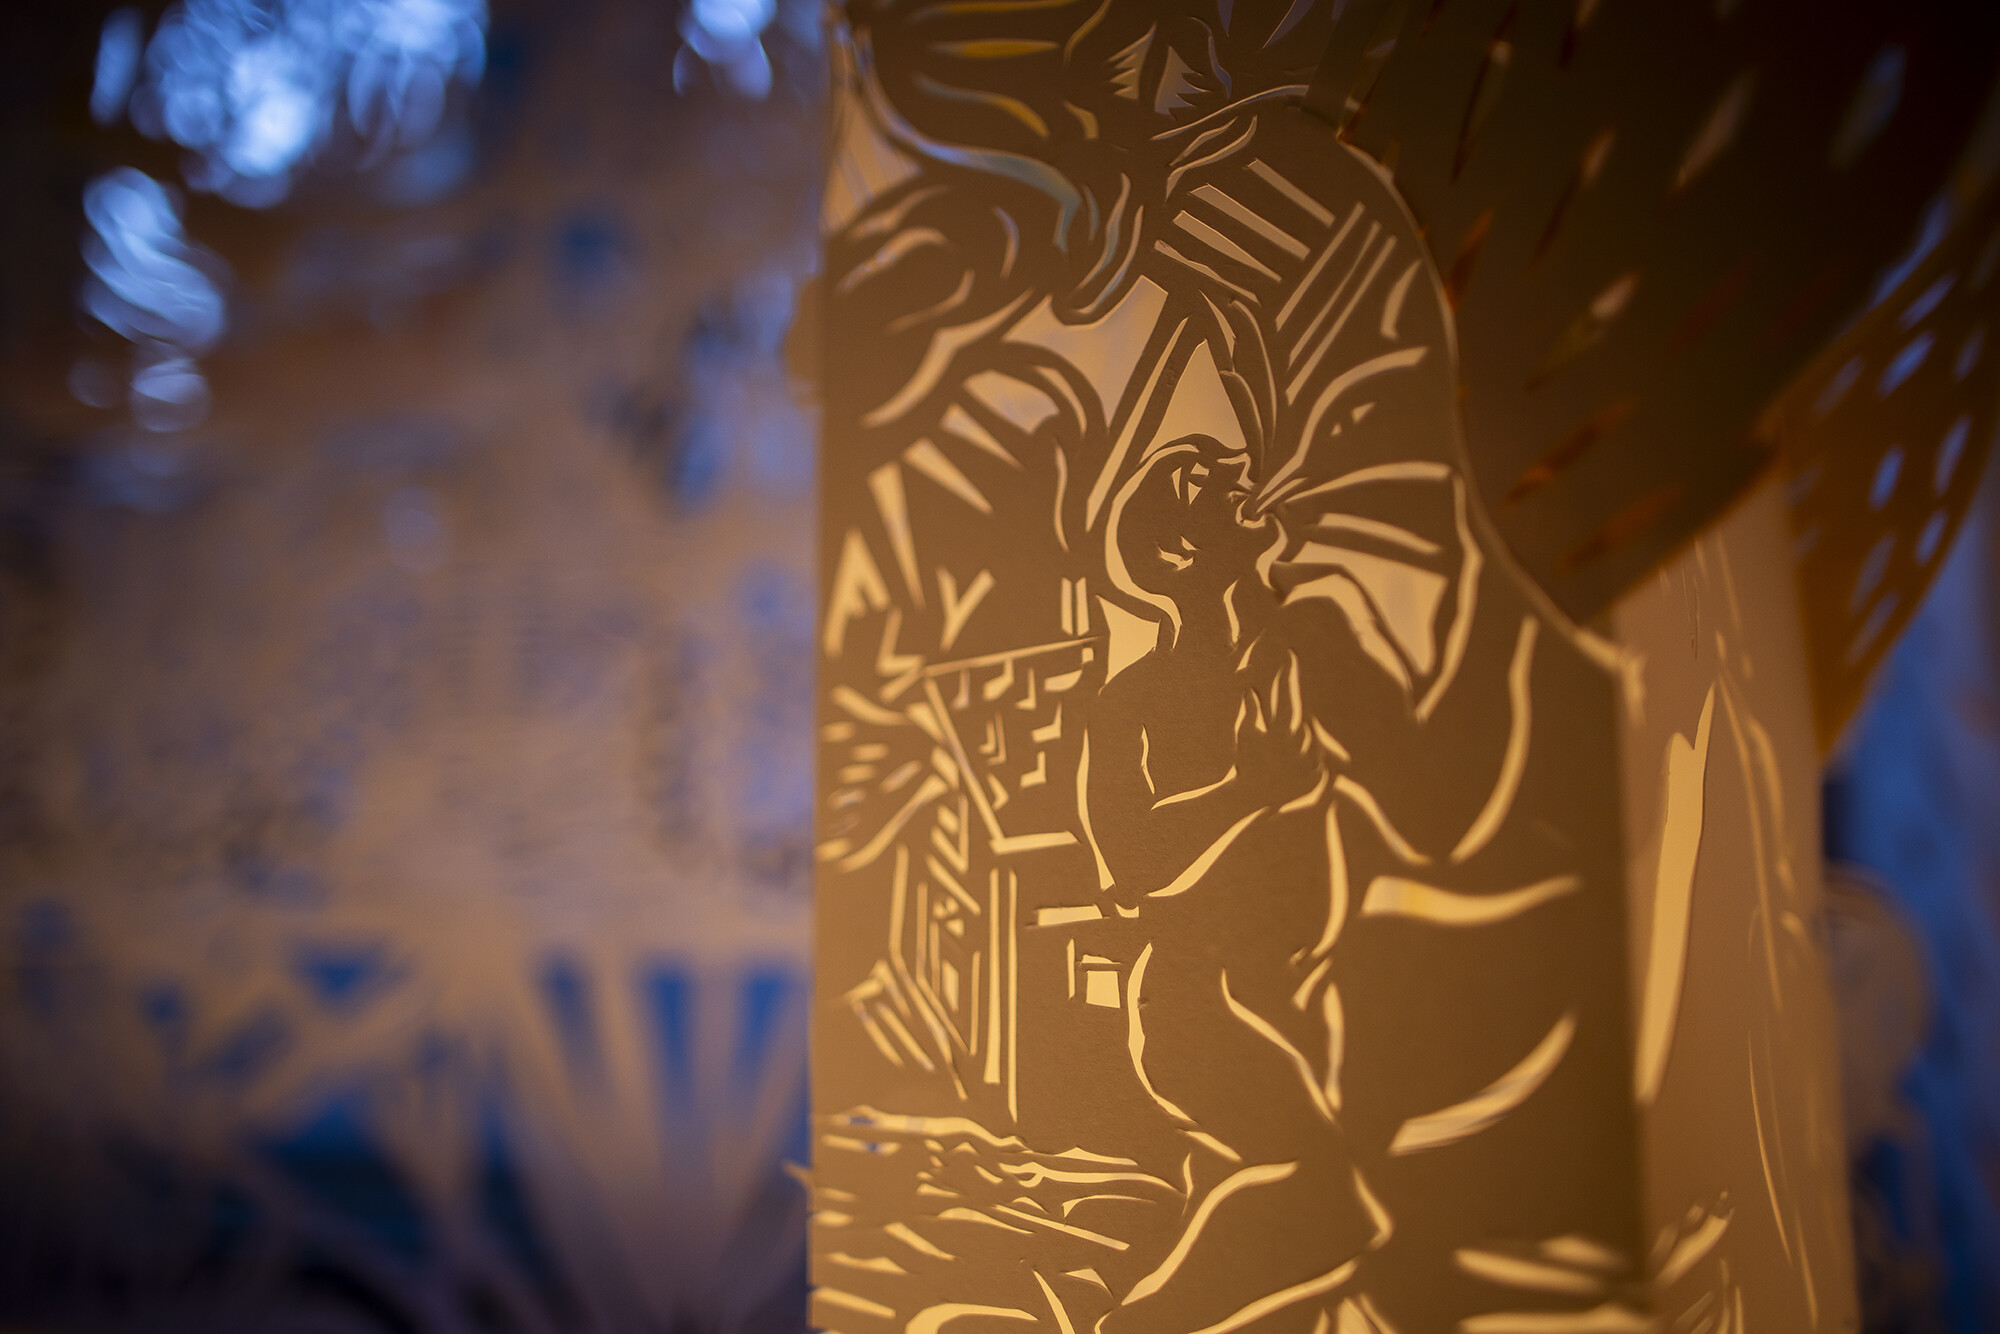 Illuminated Body detail with paper cuts